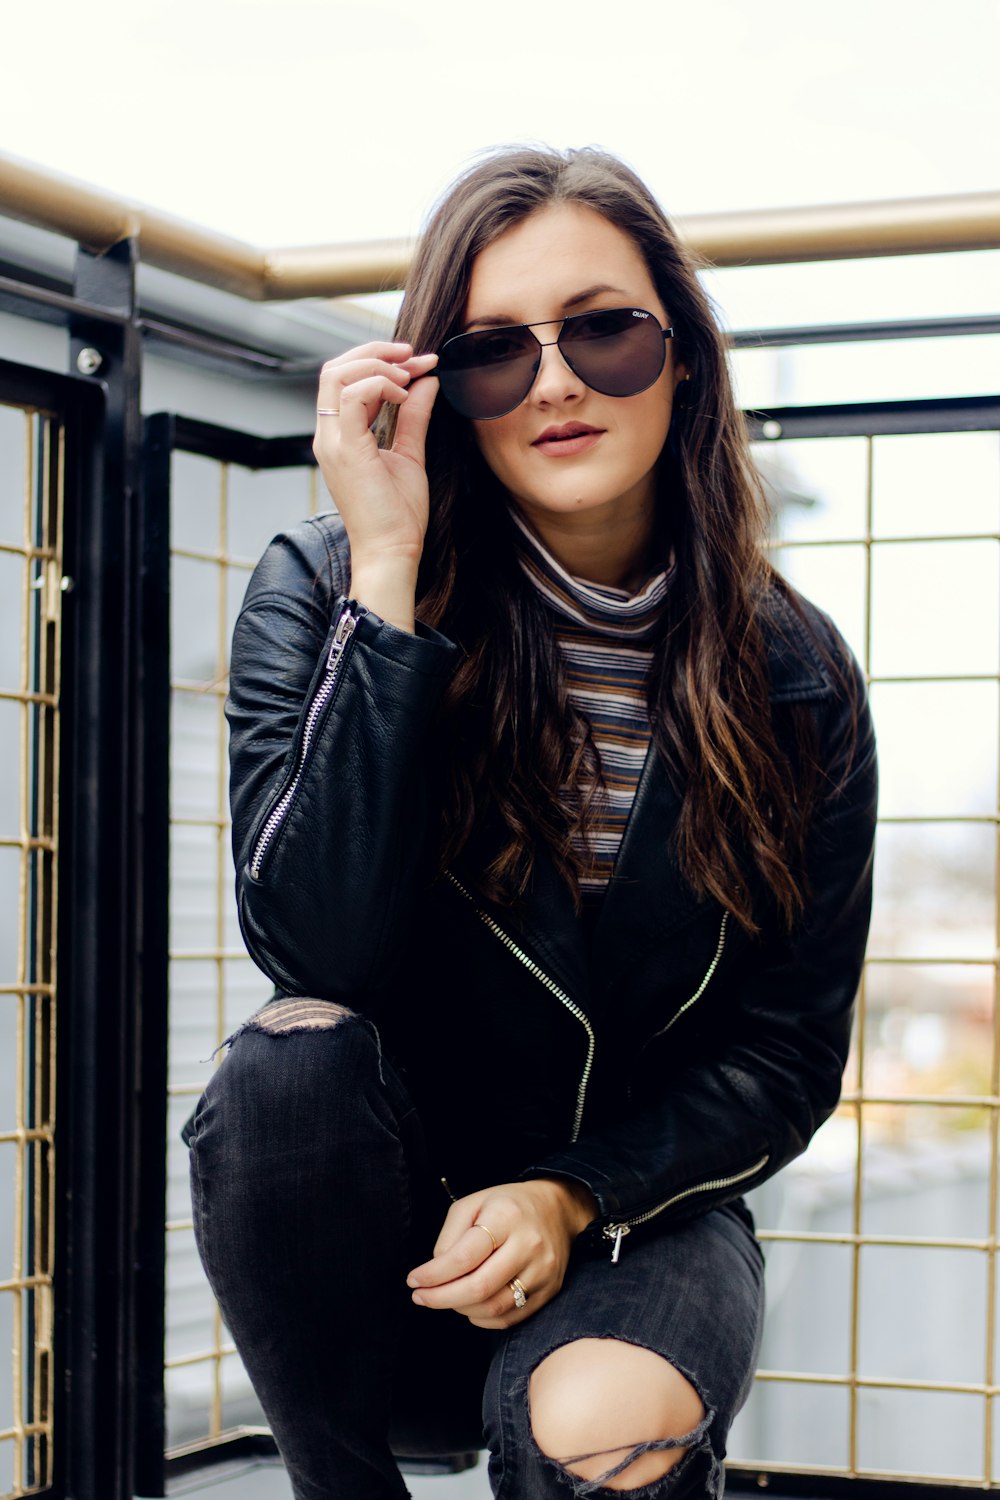 sitting woman wearing black leather jacket and distressed black denim jeans right hand holding sunglasses